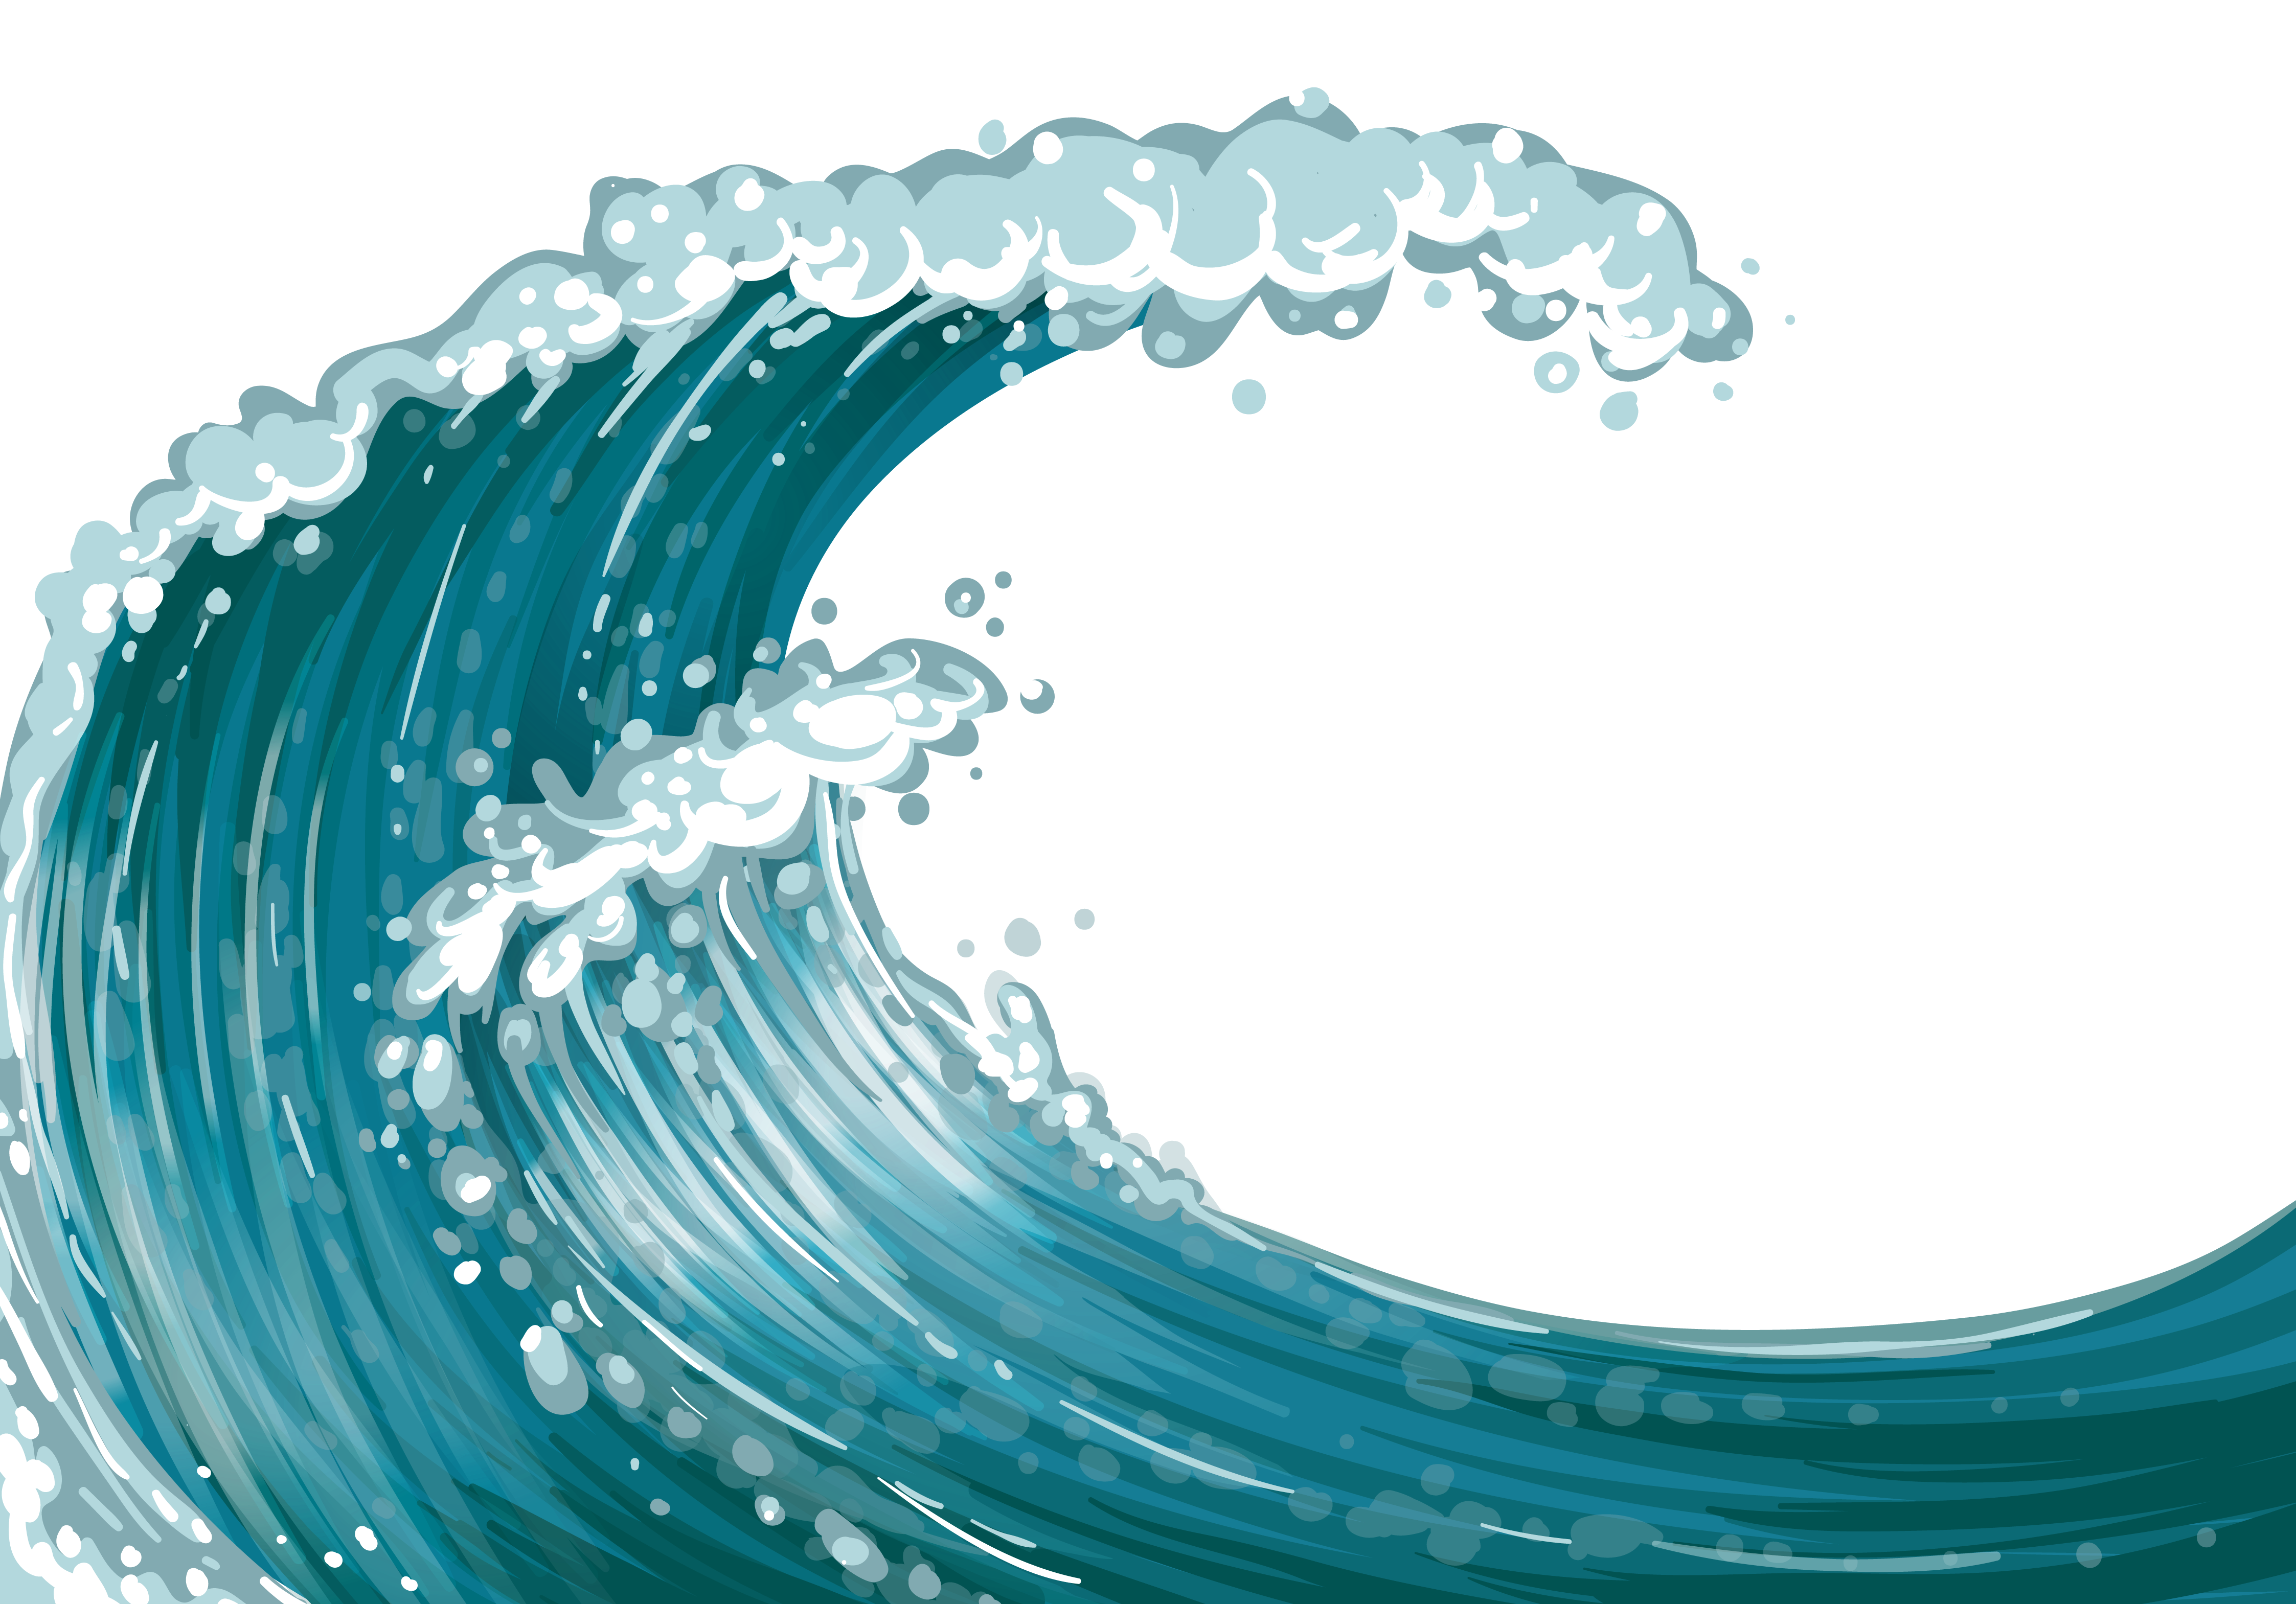 Sea png gallery yopriceville. Waves clipart lake wave